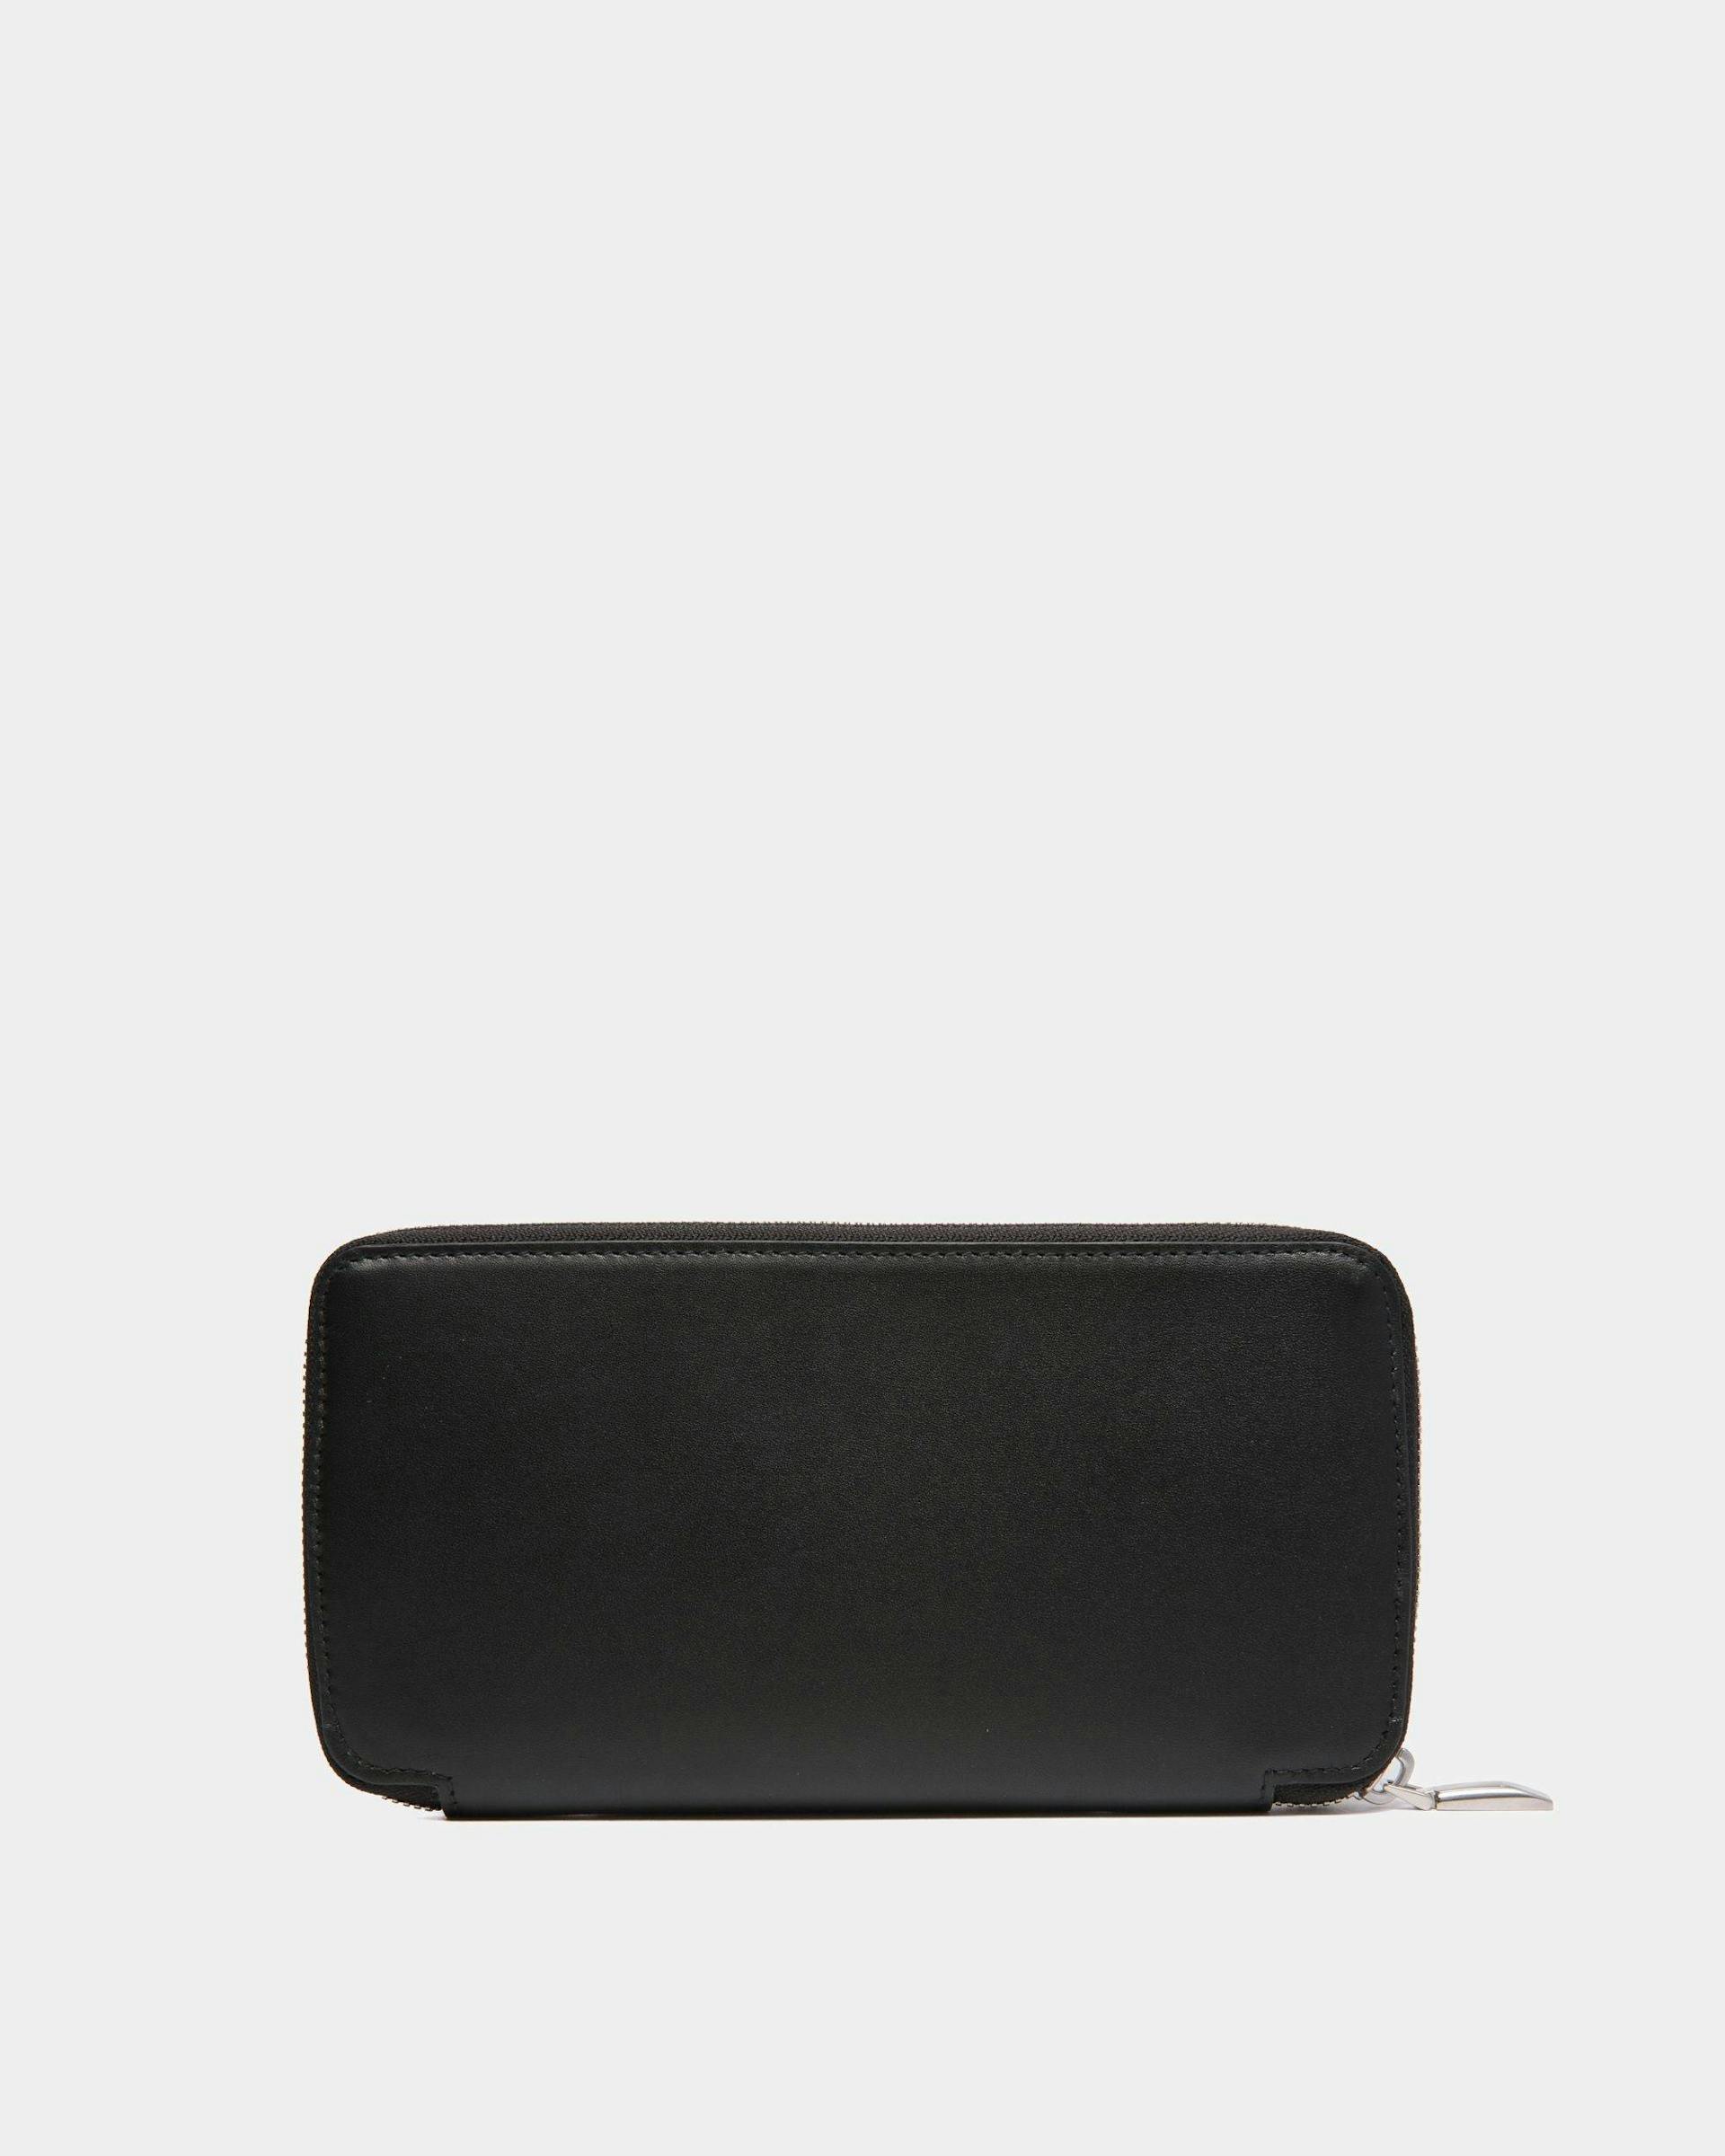 Men's Busy Bally Zip Around Wallet in Black Leather | Bally | Still Life Back